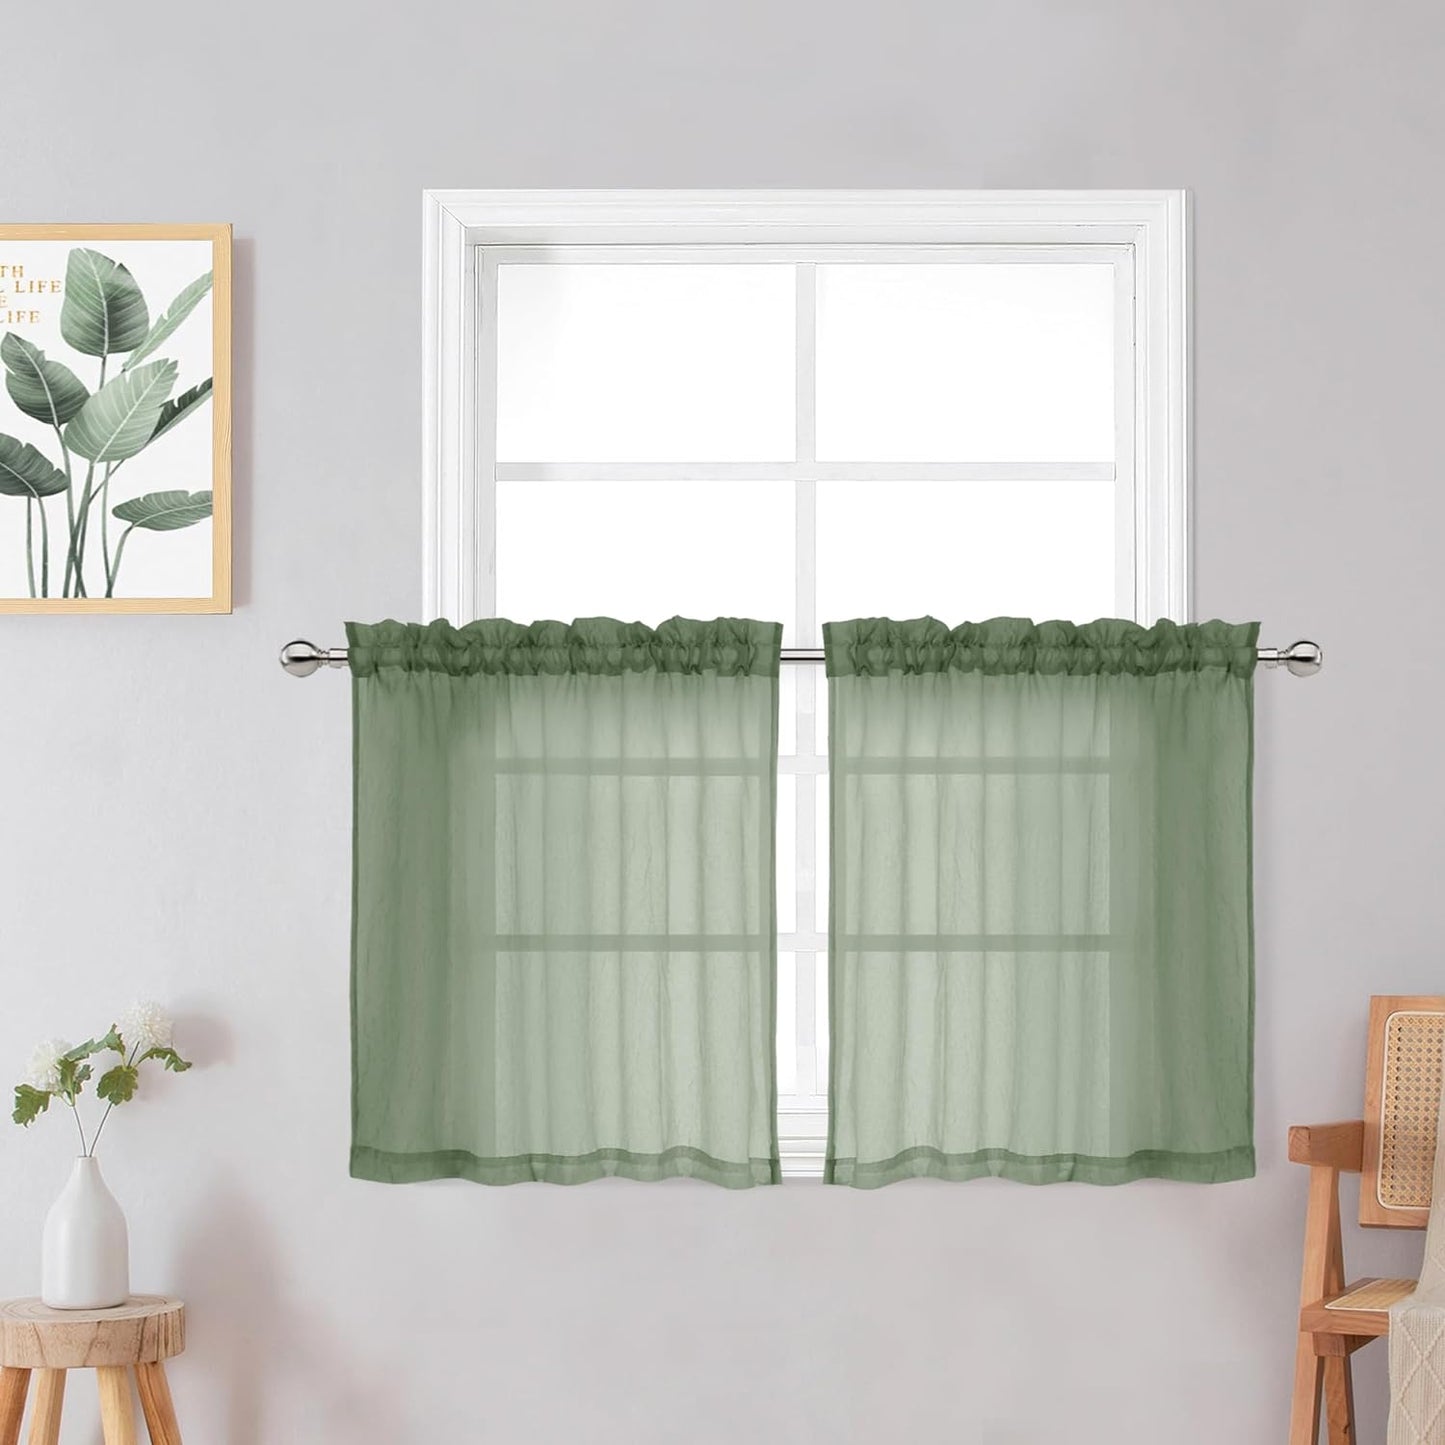 Crushed Sheer White Curtains 63 Inch Length 2 Panels, Light Filtering Solid Crinkle Voile Short Sheer Curtian for Bedroom Living Room, Each 42Wx63L Inches  Chyhomenyc Sage Green 42 W X 24 L 